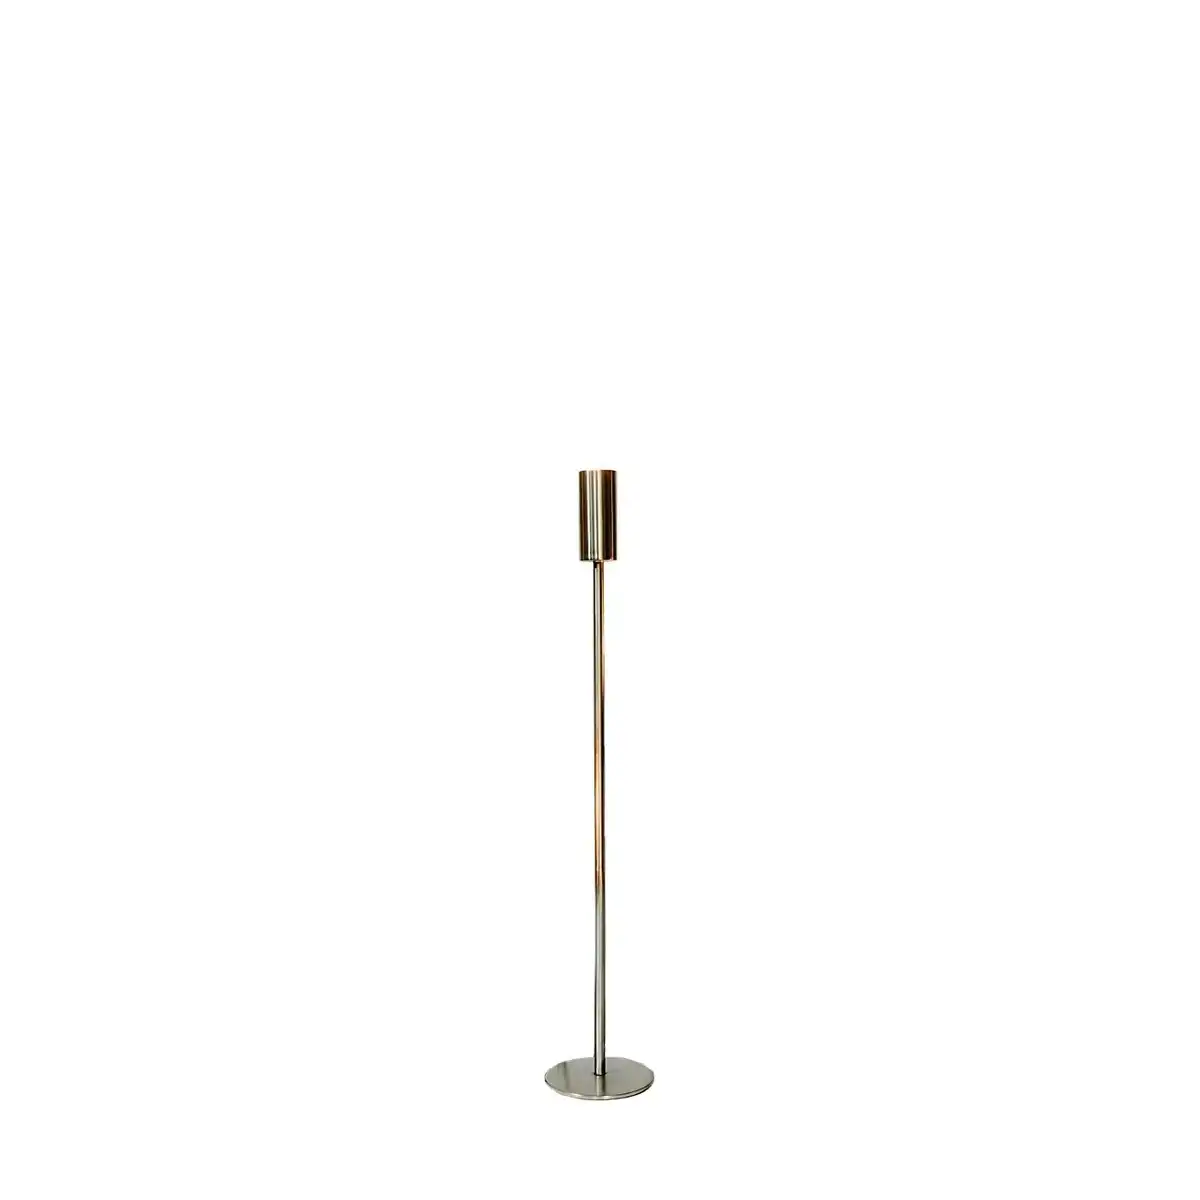 SSH Collection Ava 70cm Tall Single Candle Stand - Nickel